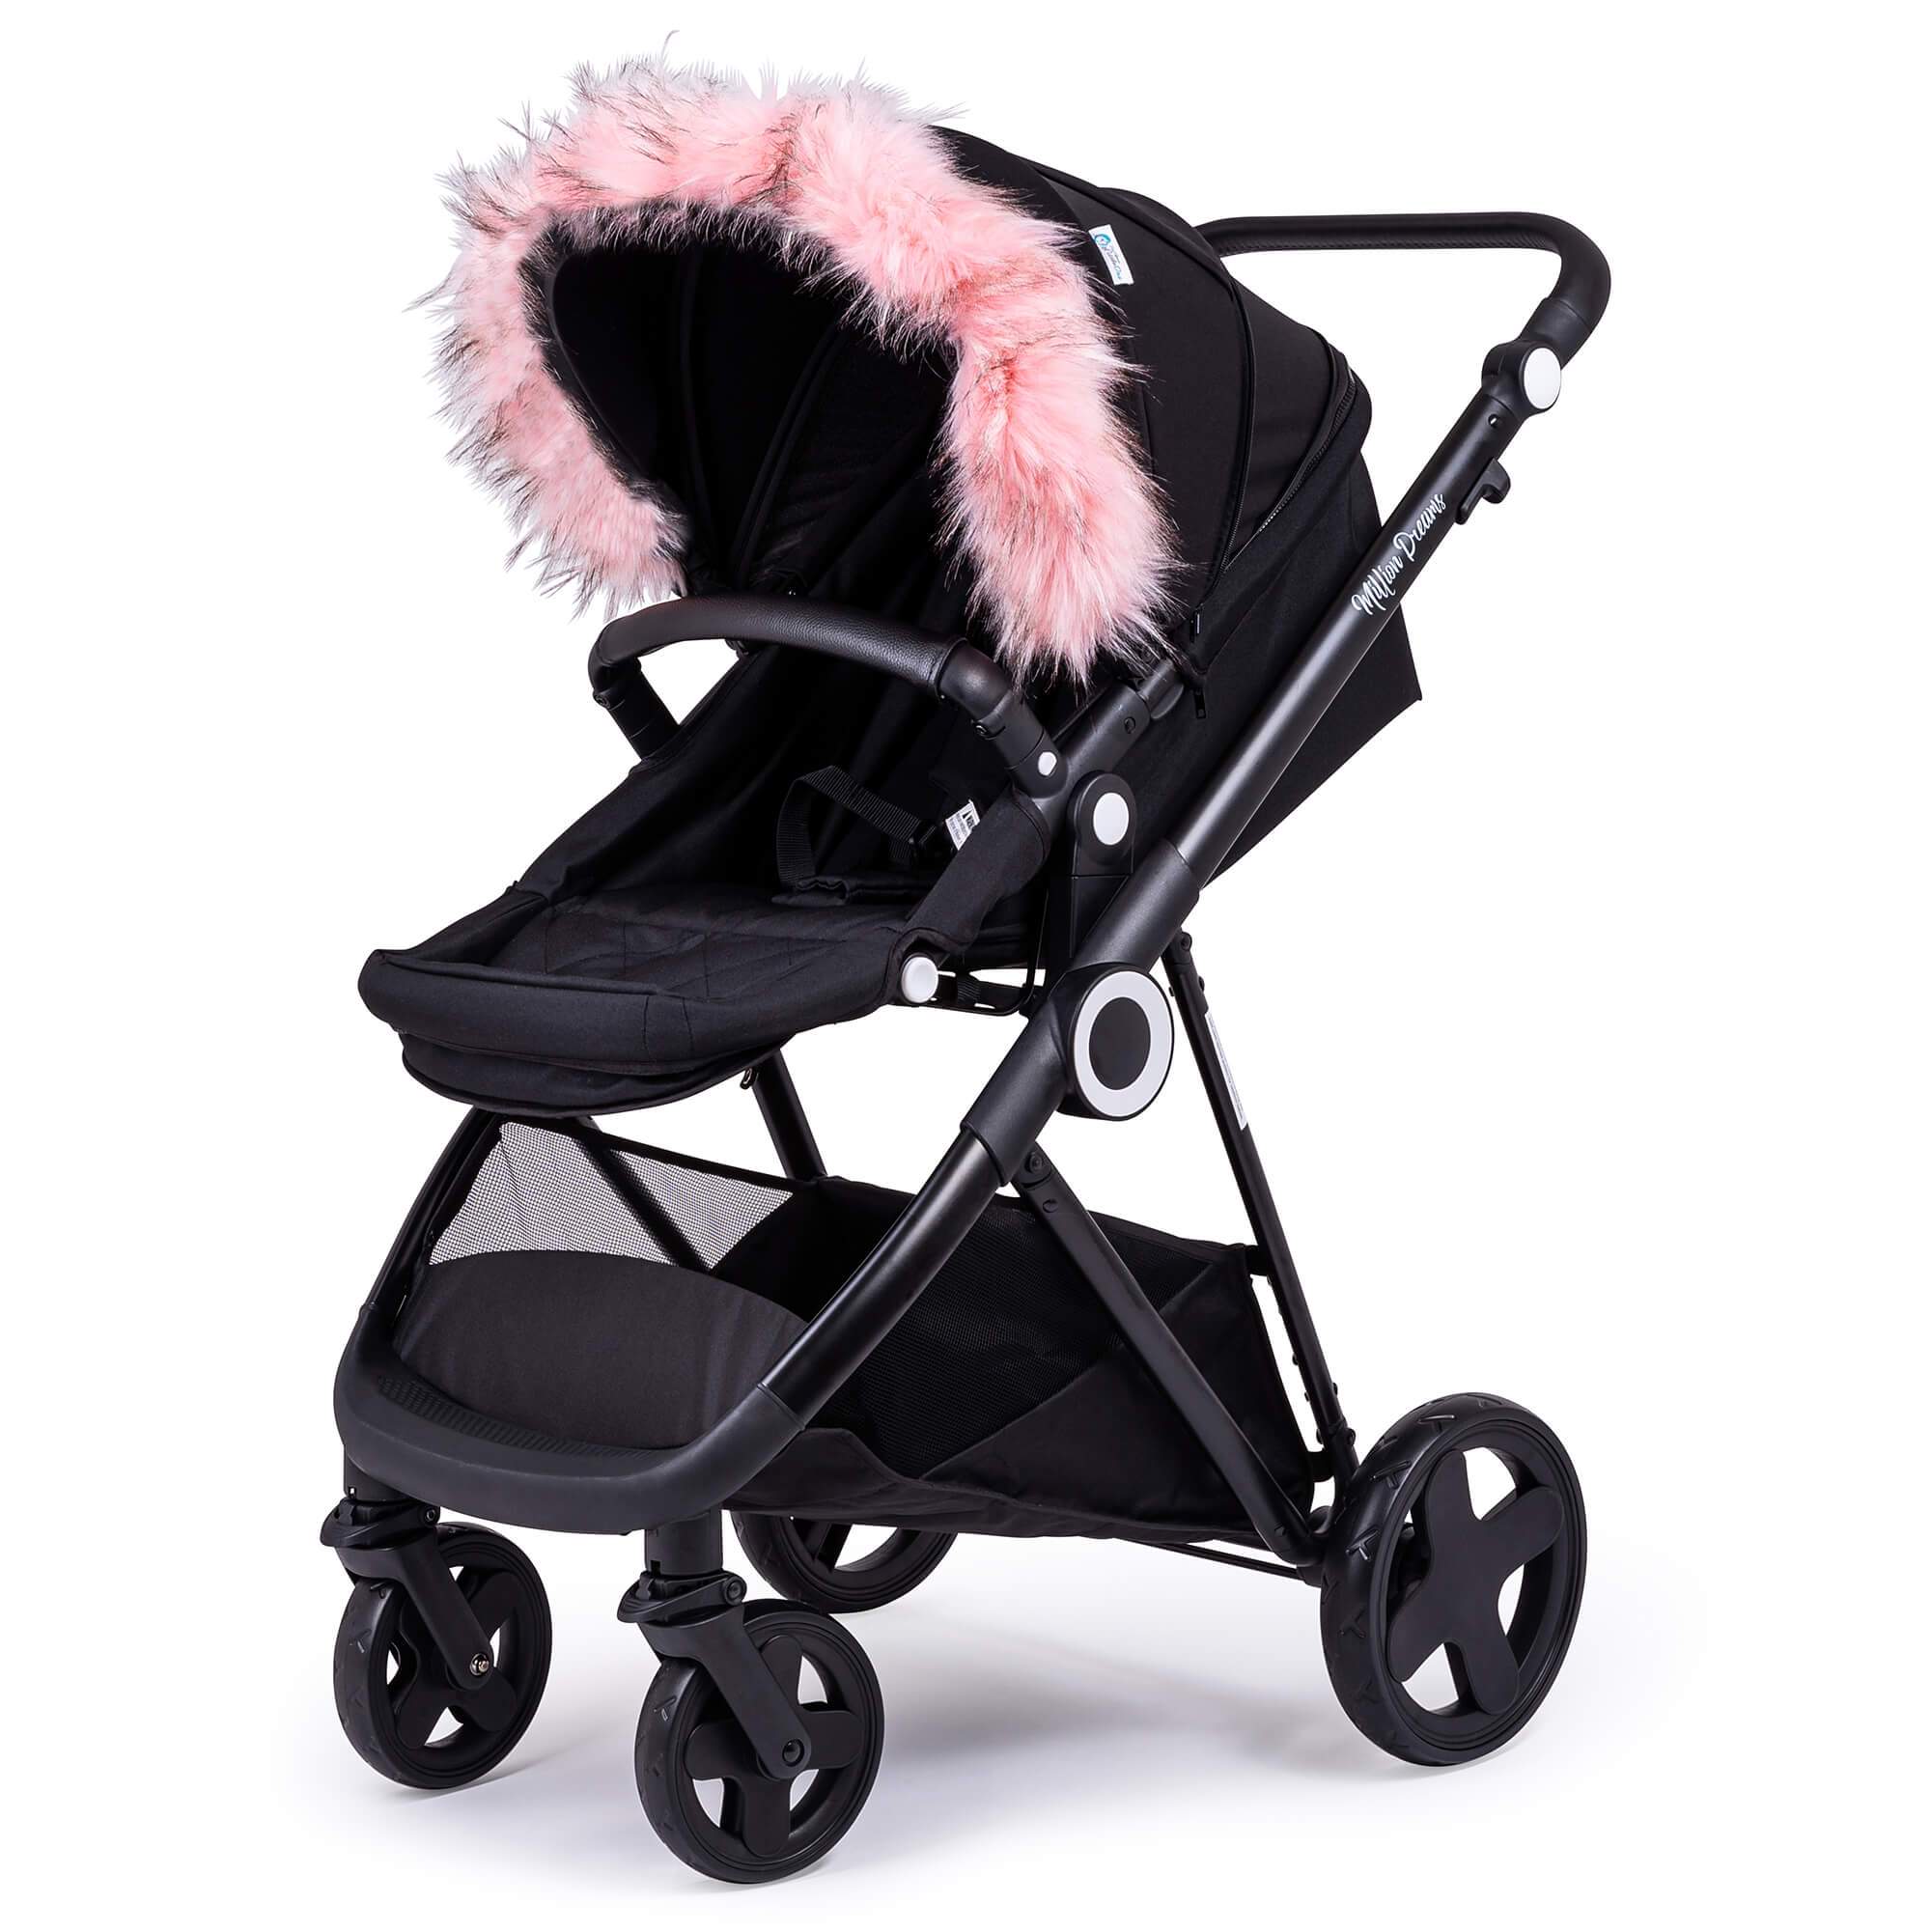 Pram Fur Hood Trim Attachment for Pushchair Compatible with Quinny - For Your Little One